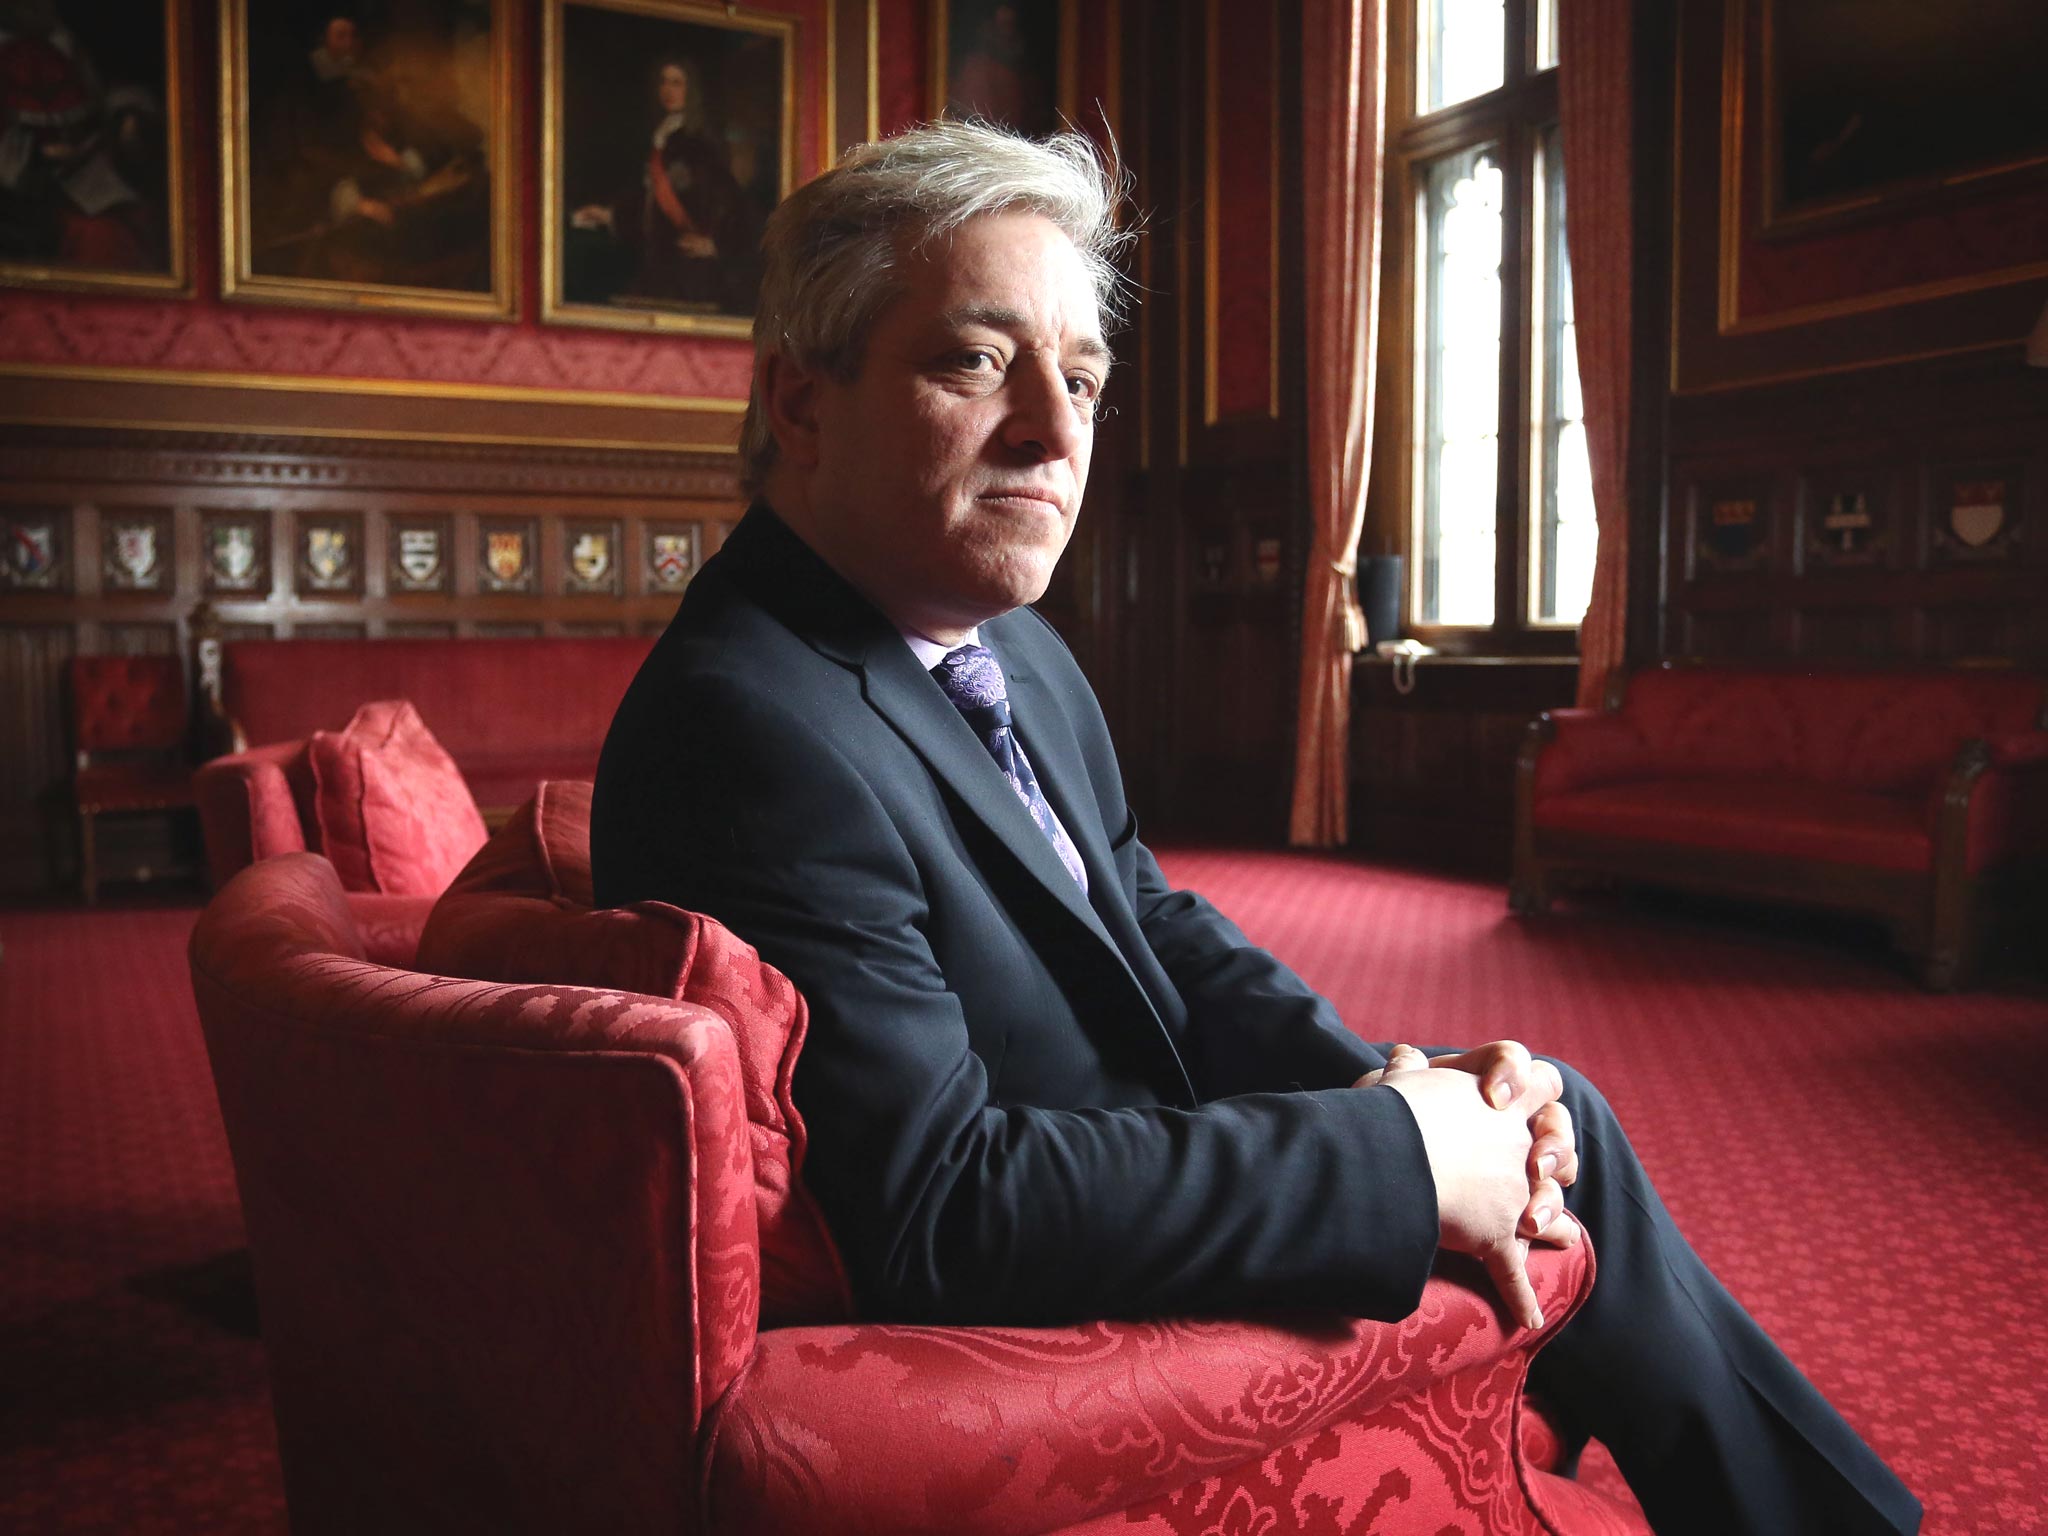 Commons Speaker John Bercow is calling for reform to PMQs